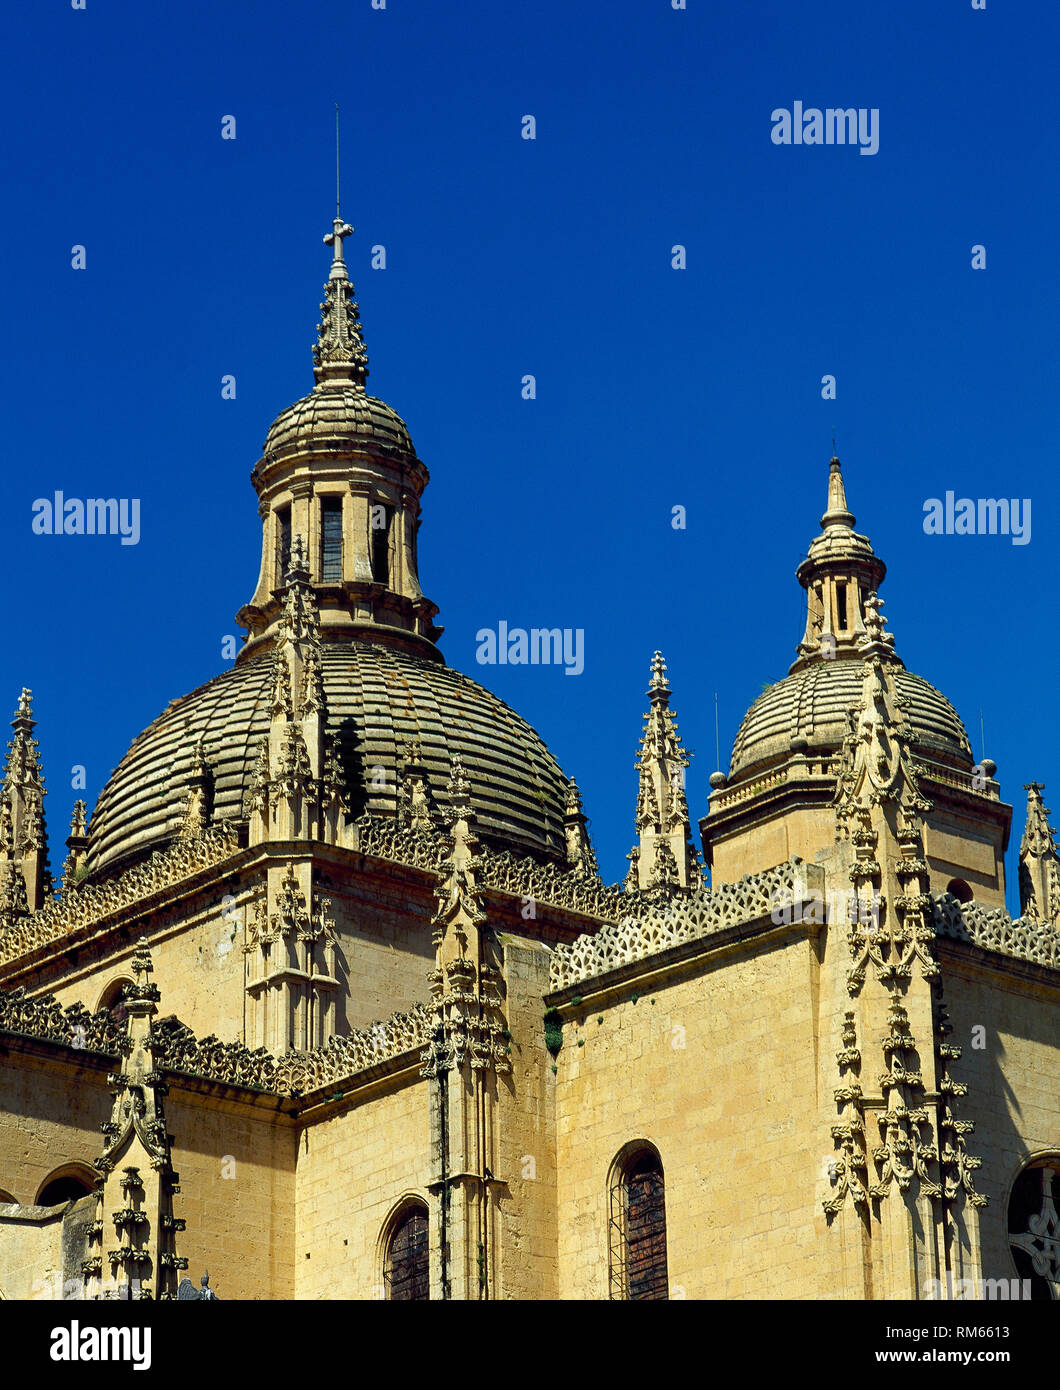 Spain, Castile and Leon, Segovia. Cathedral, dedicated to the Virgin Mary, built in Last Gothic style. 16th century. It was designed by Juan Gil de Hontañon and Rodrigo Gil de Hontañon. Architectural detail. Pinnacles and buttres. Dome and lantern. Stock Photo